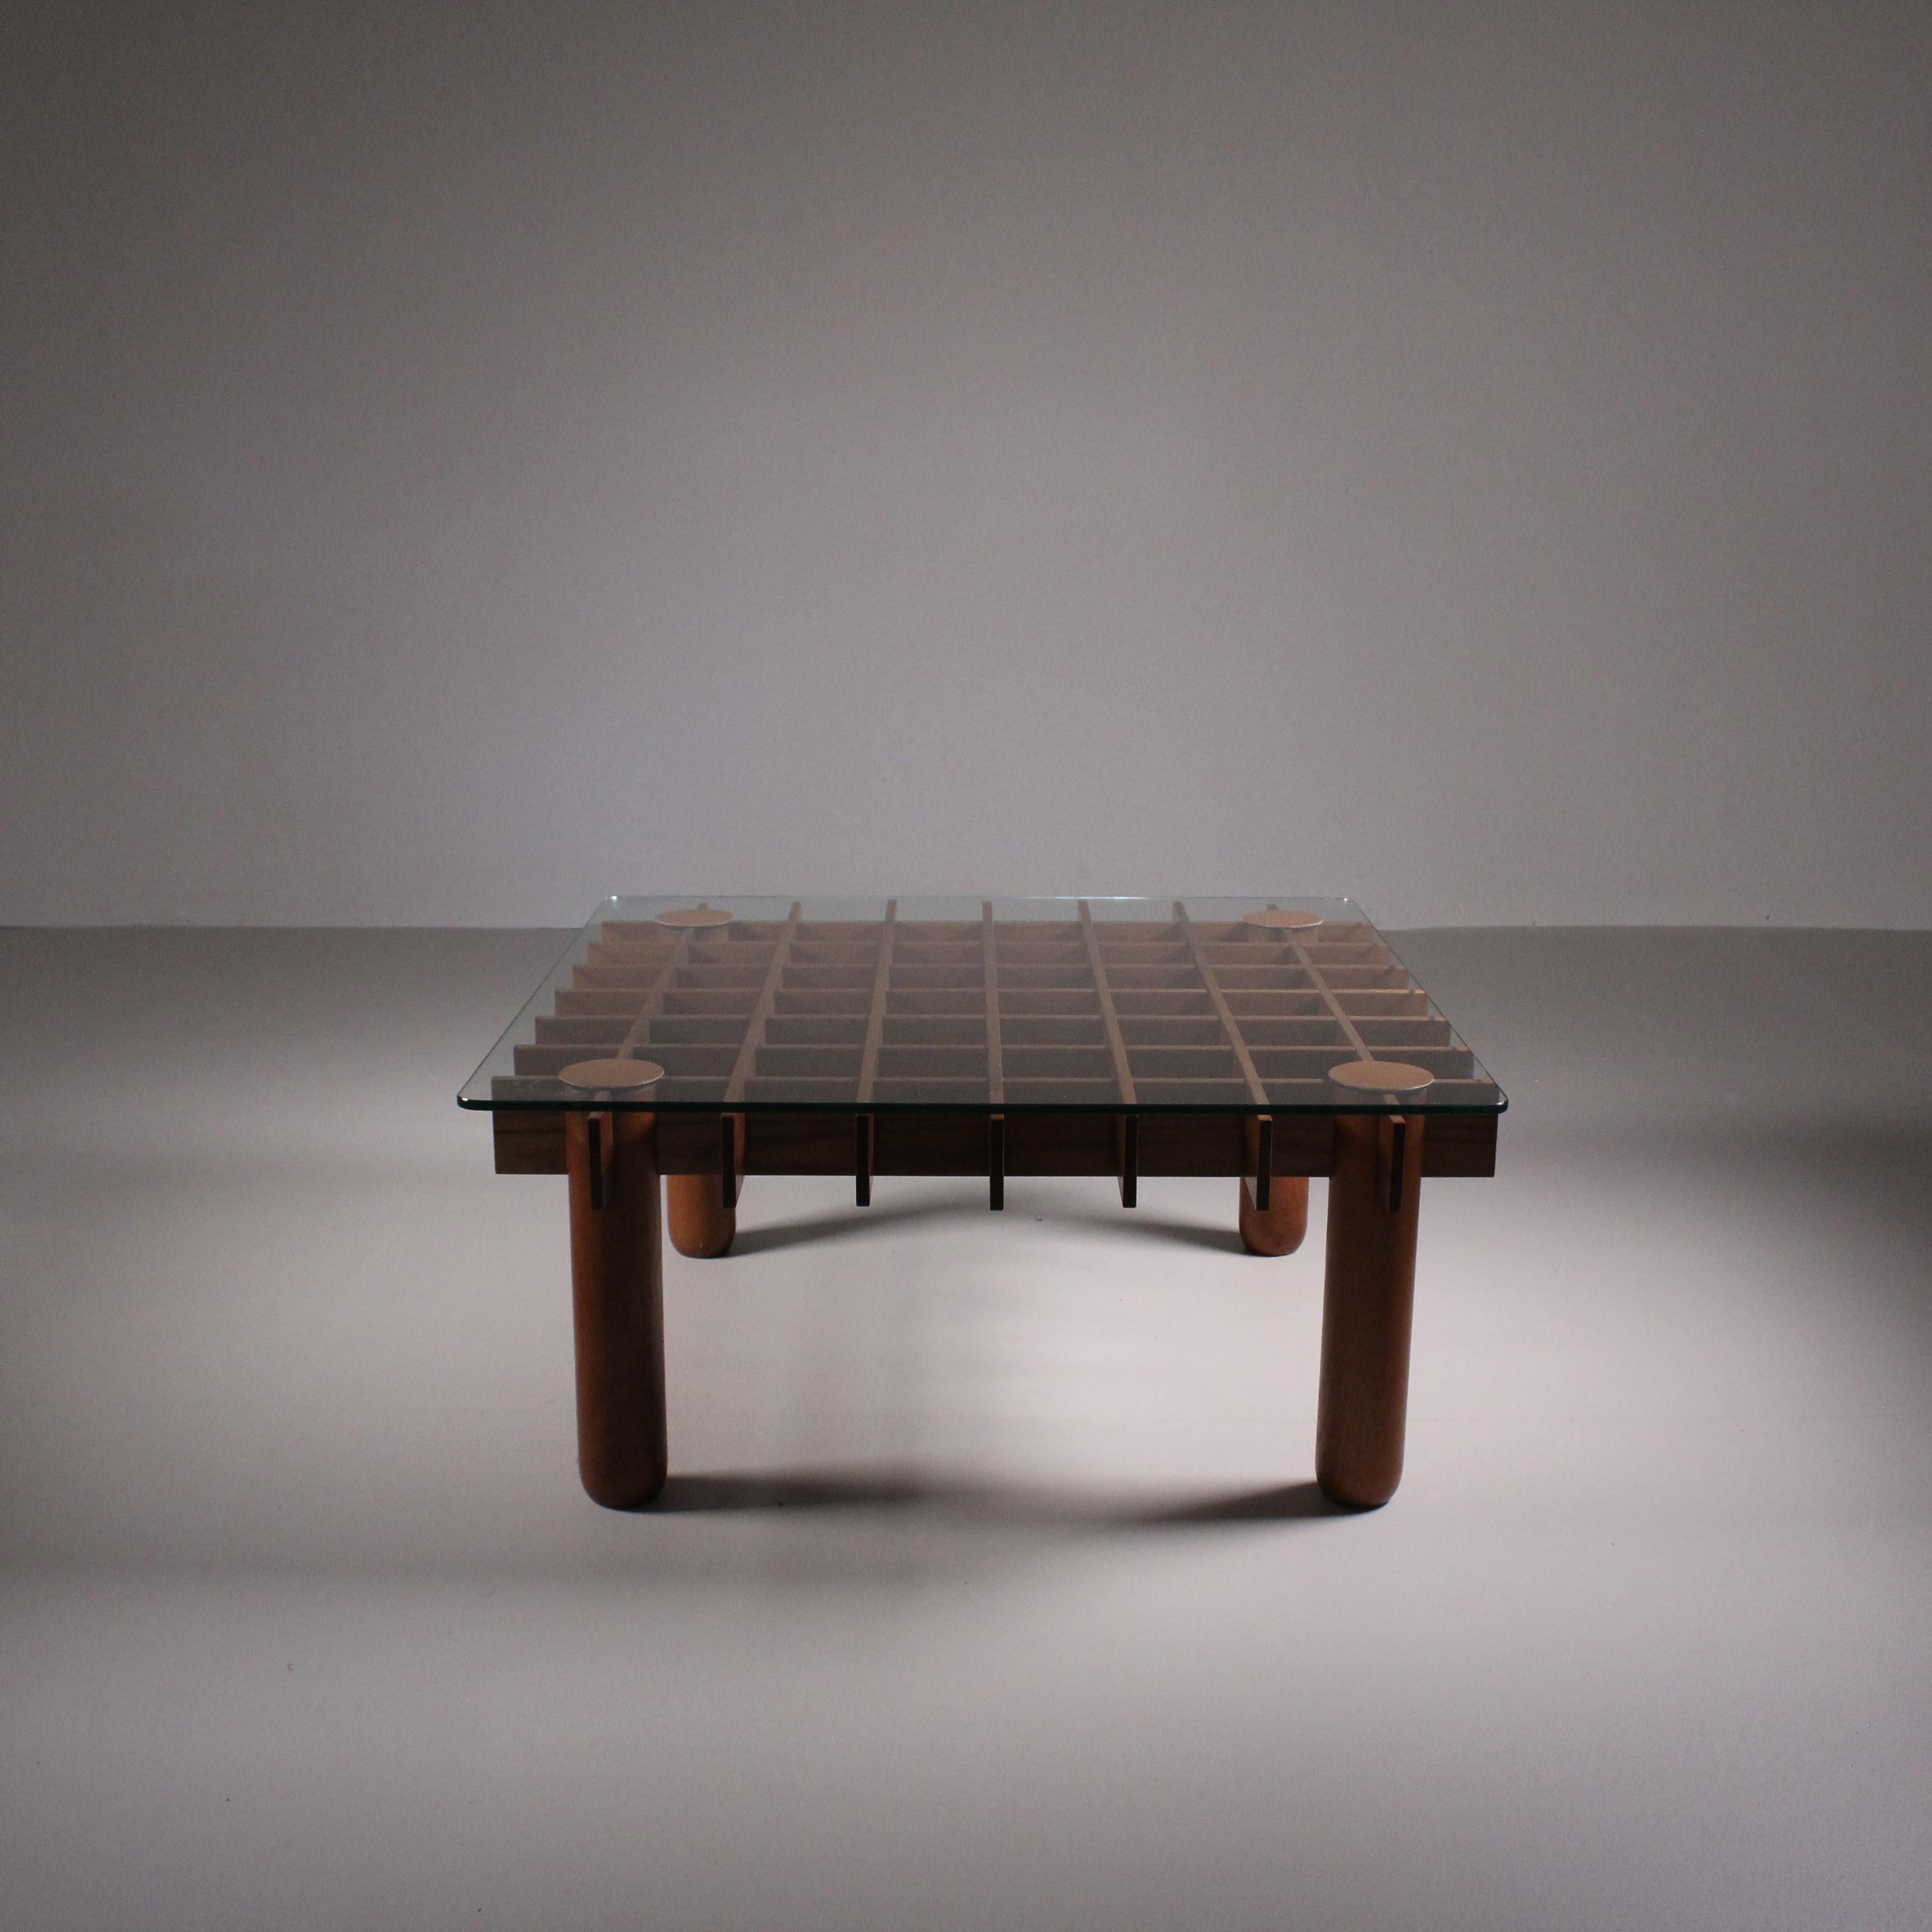 Low table In wood and glass.